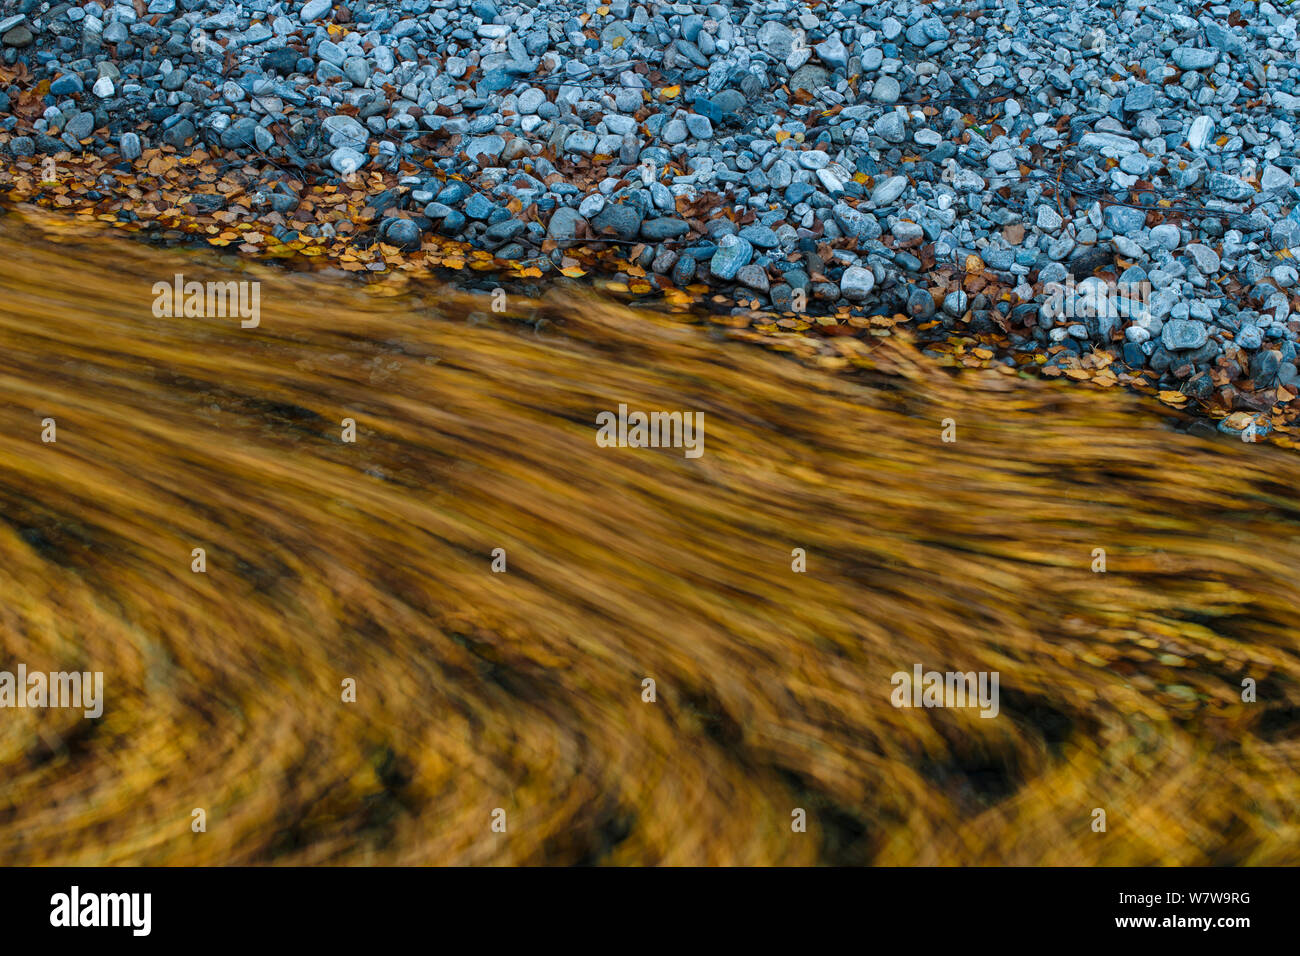 Abstract of river with autumn leaves and rocky shore, Dovrefjell National Park, Norway, September 2013. Stock Photo